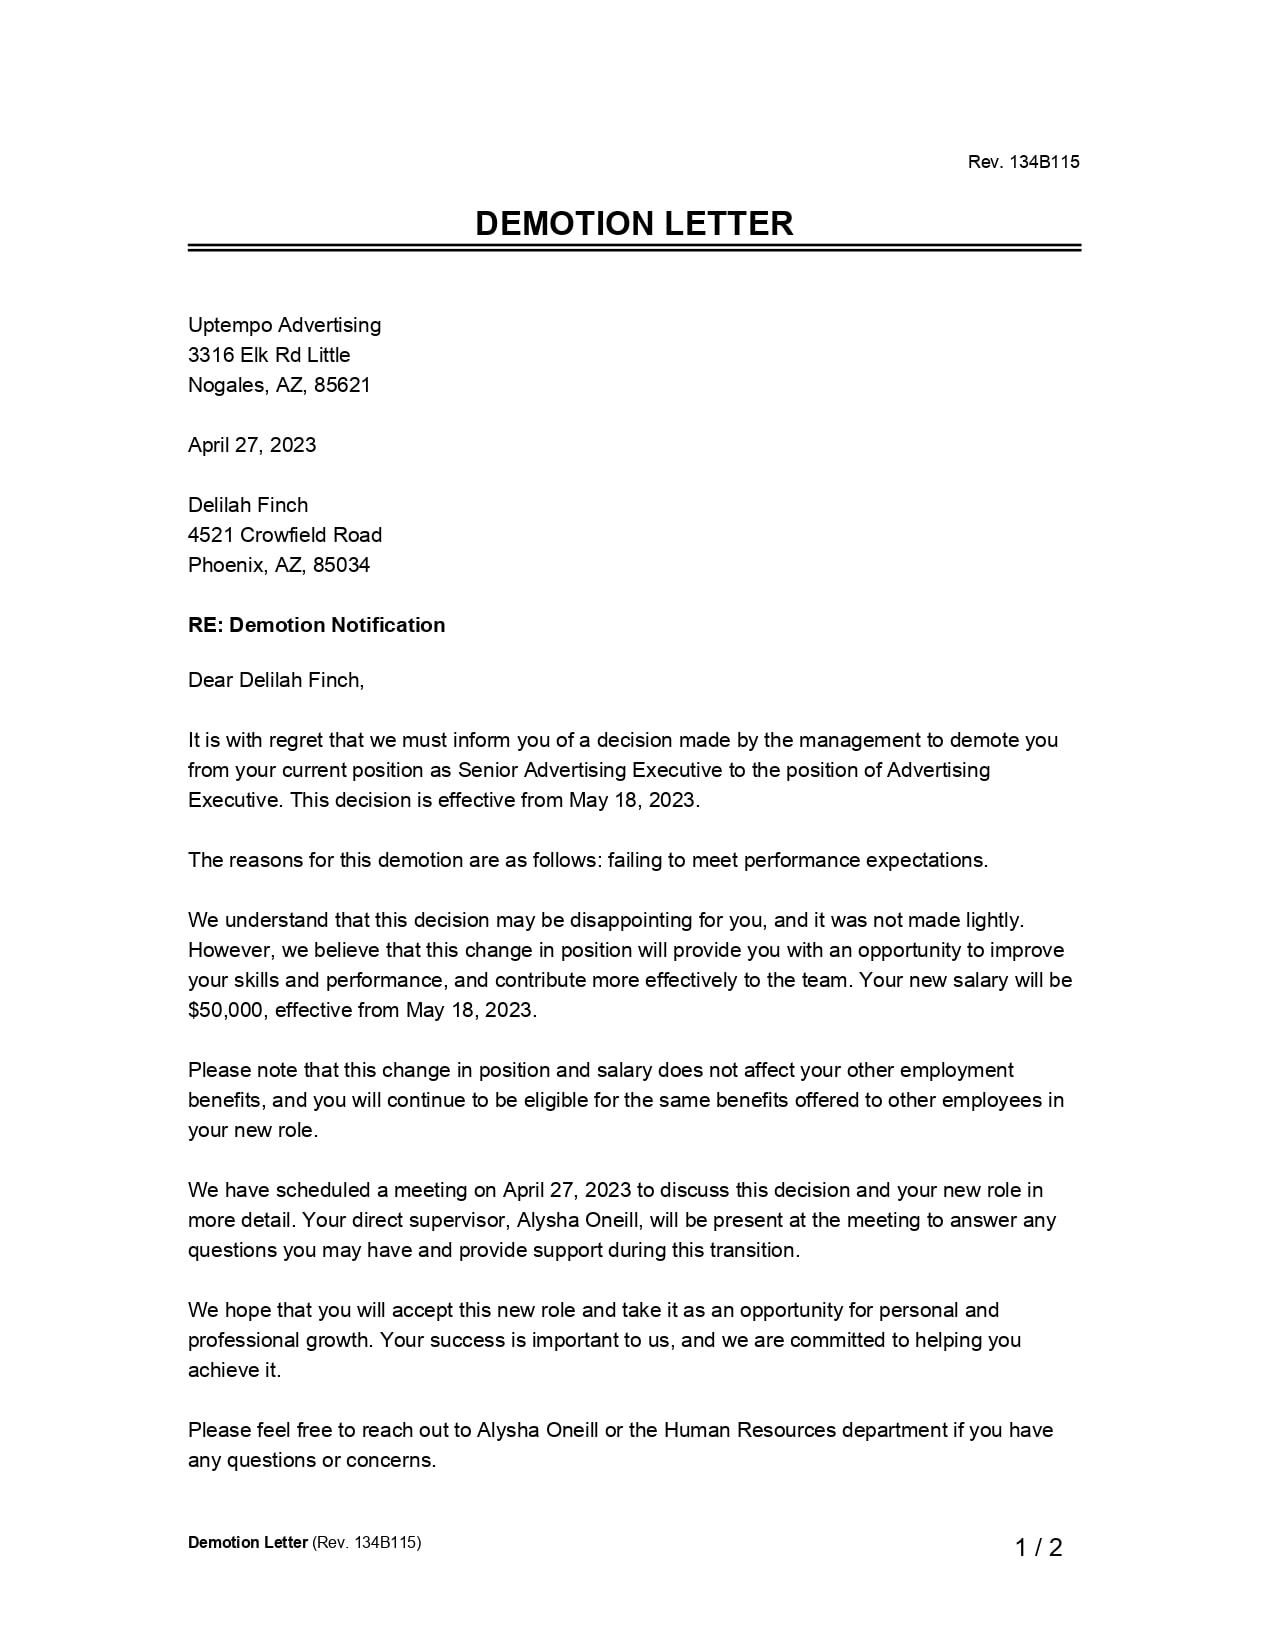 Demotion Letter example page 1